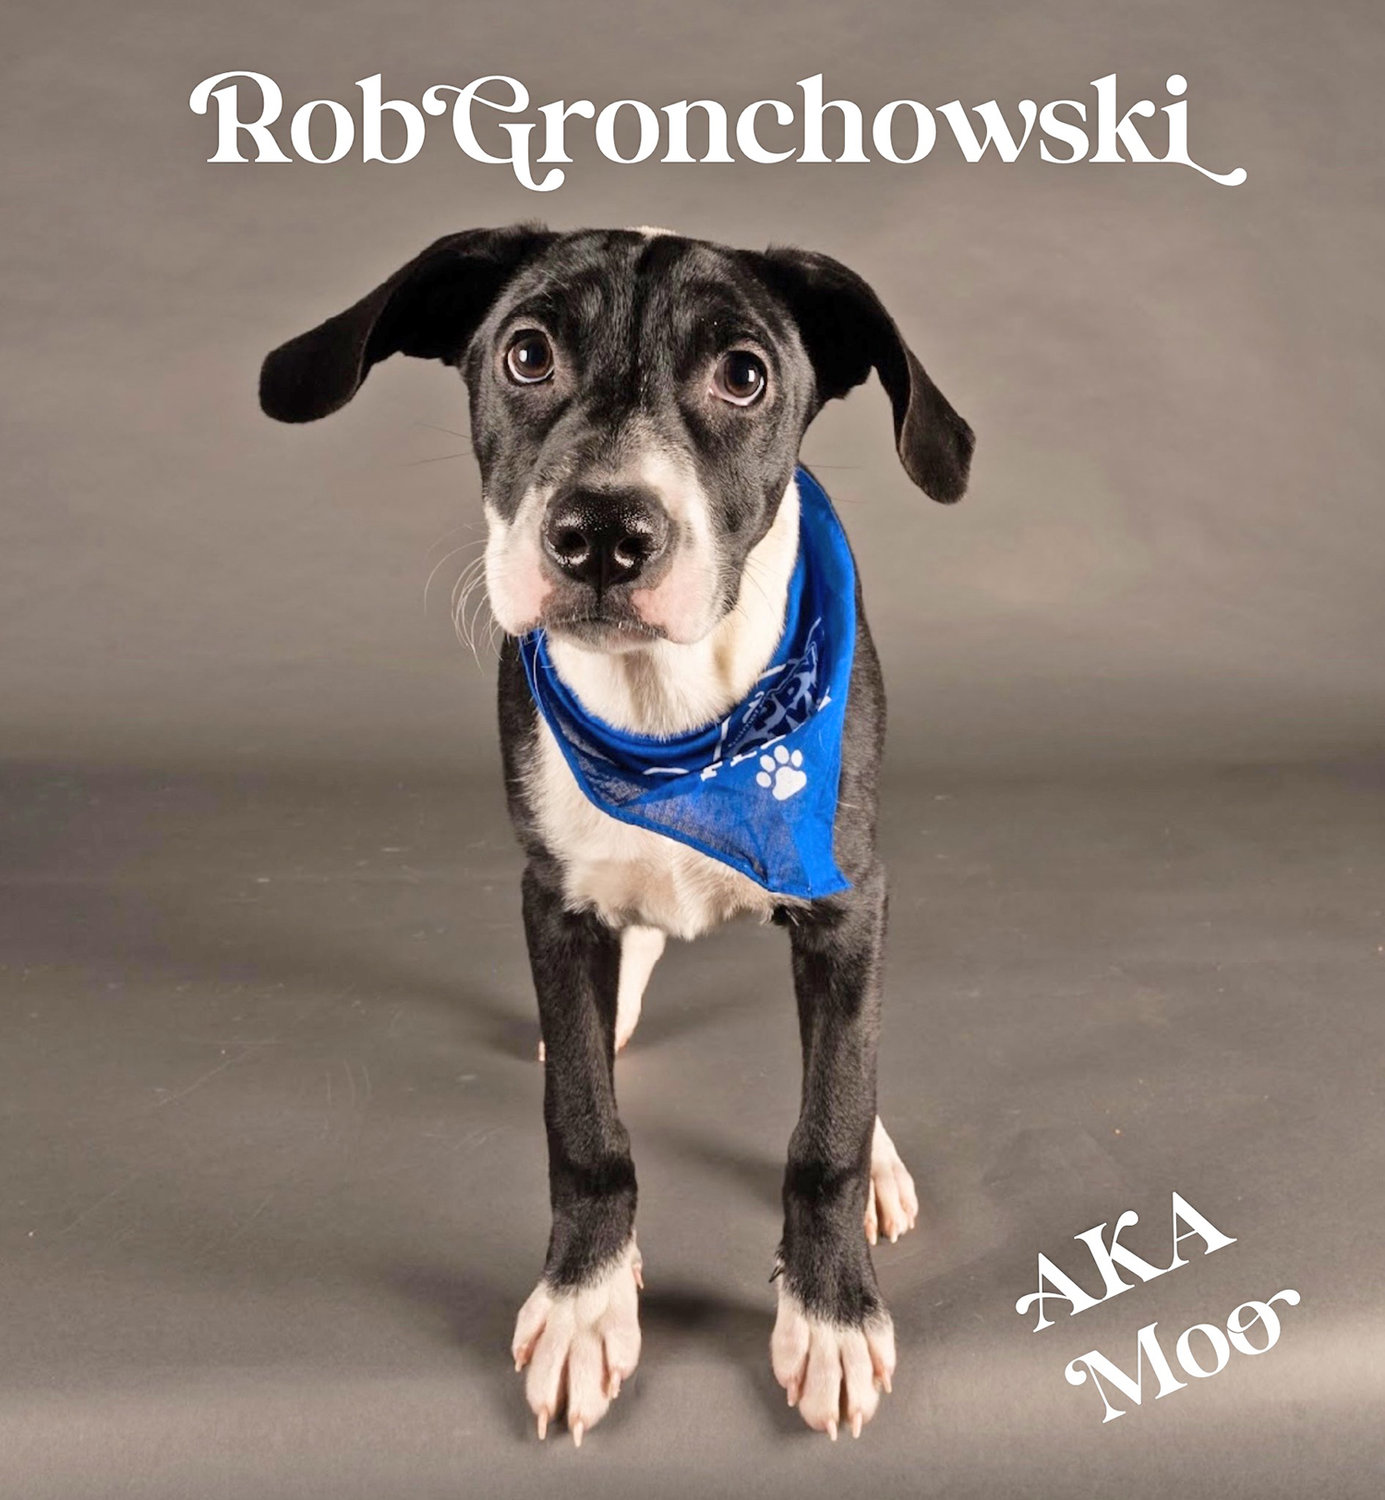 TEAM FLUFF — Rob Gronchowski, aka “Moo,” will represent Team Fluff and the Love My Pitties Rescue, the sister shelter of House of Paws Rescue in Utica, at Puppy Bowl XVIII.